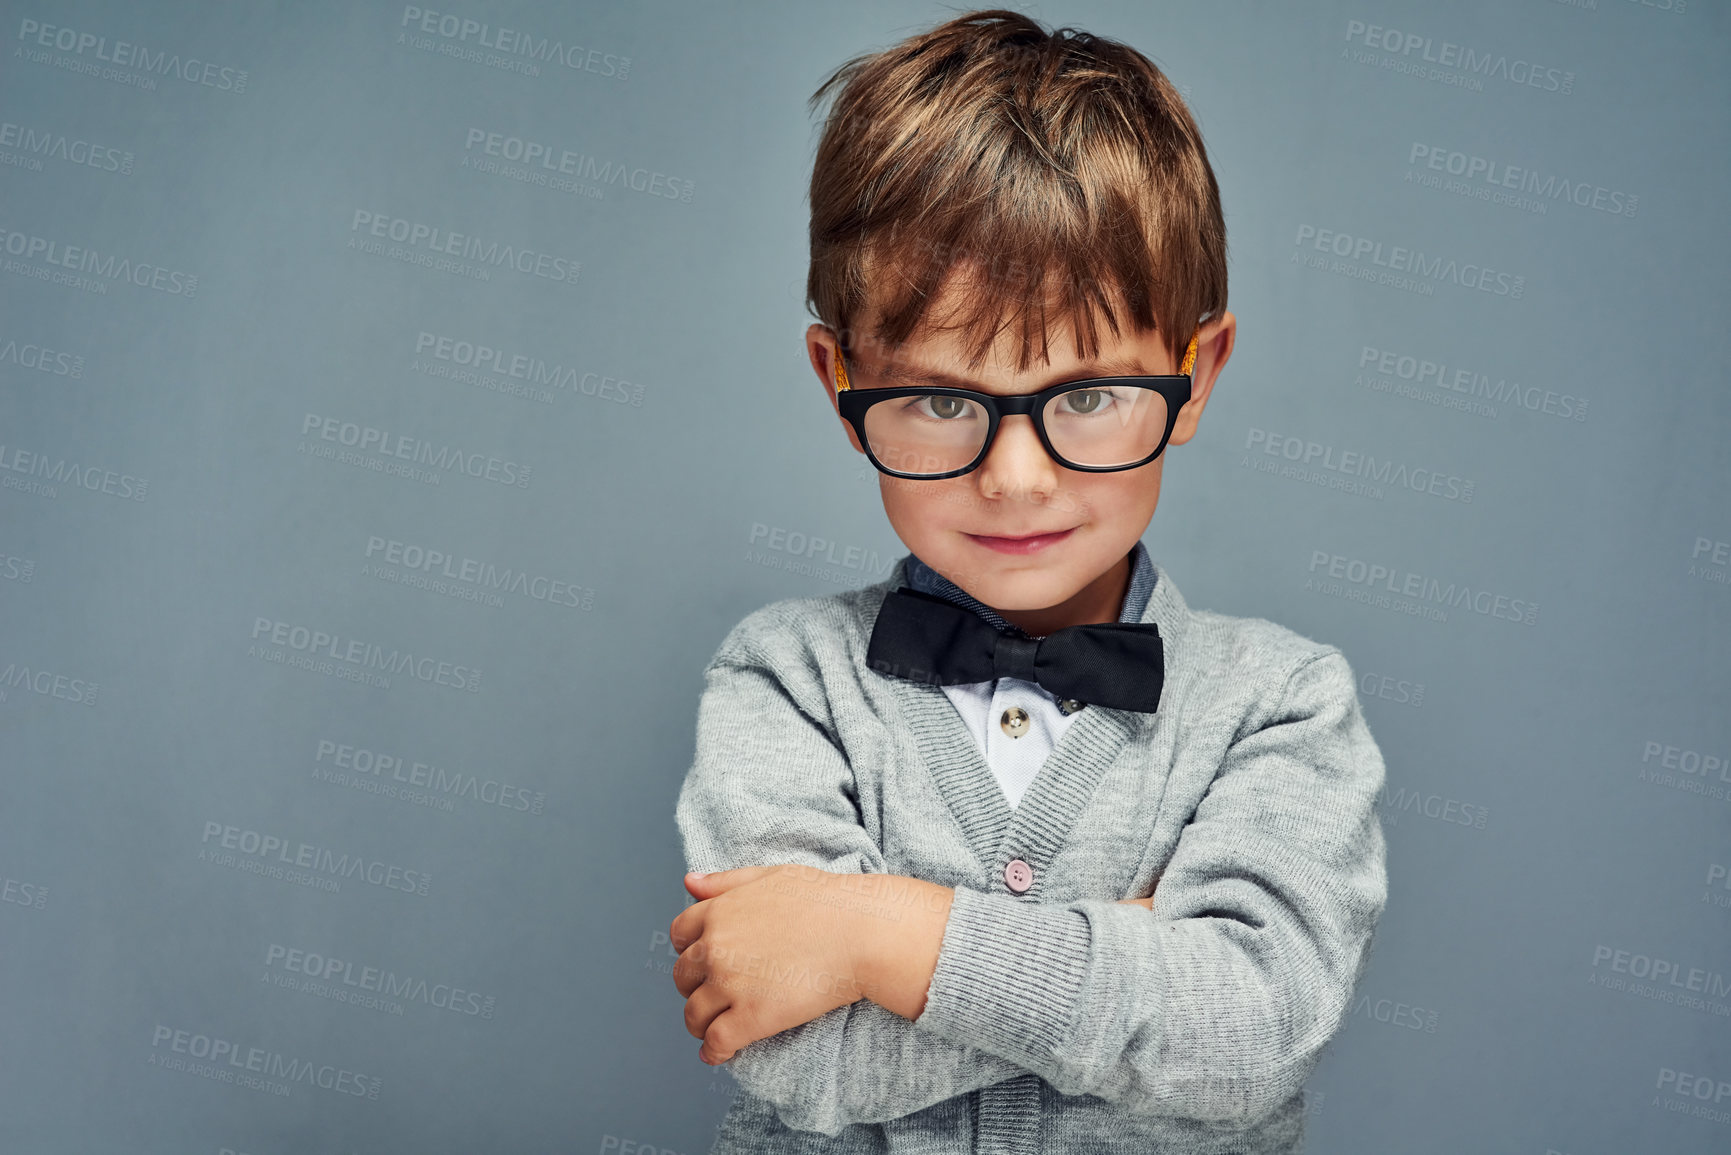 Buy stock photo Studio portrait of a smartly dressed little boy posing confidently against a gray background